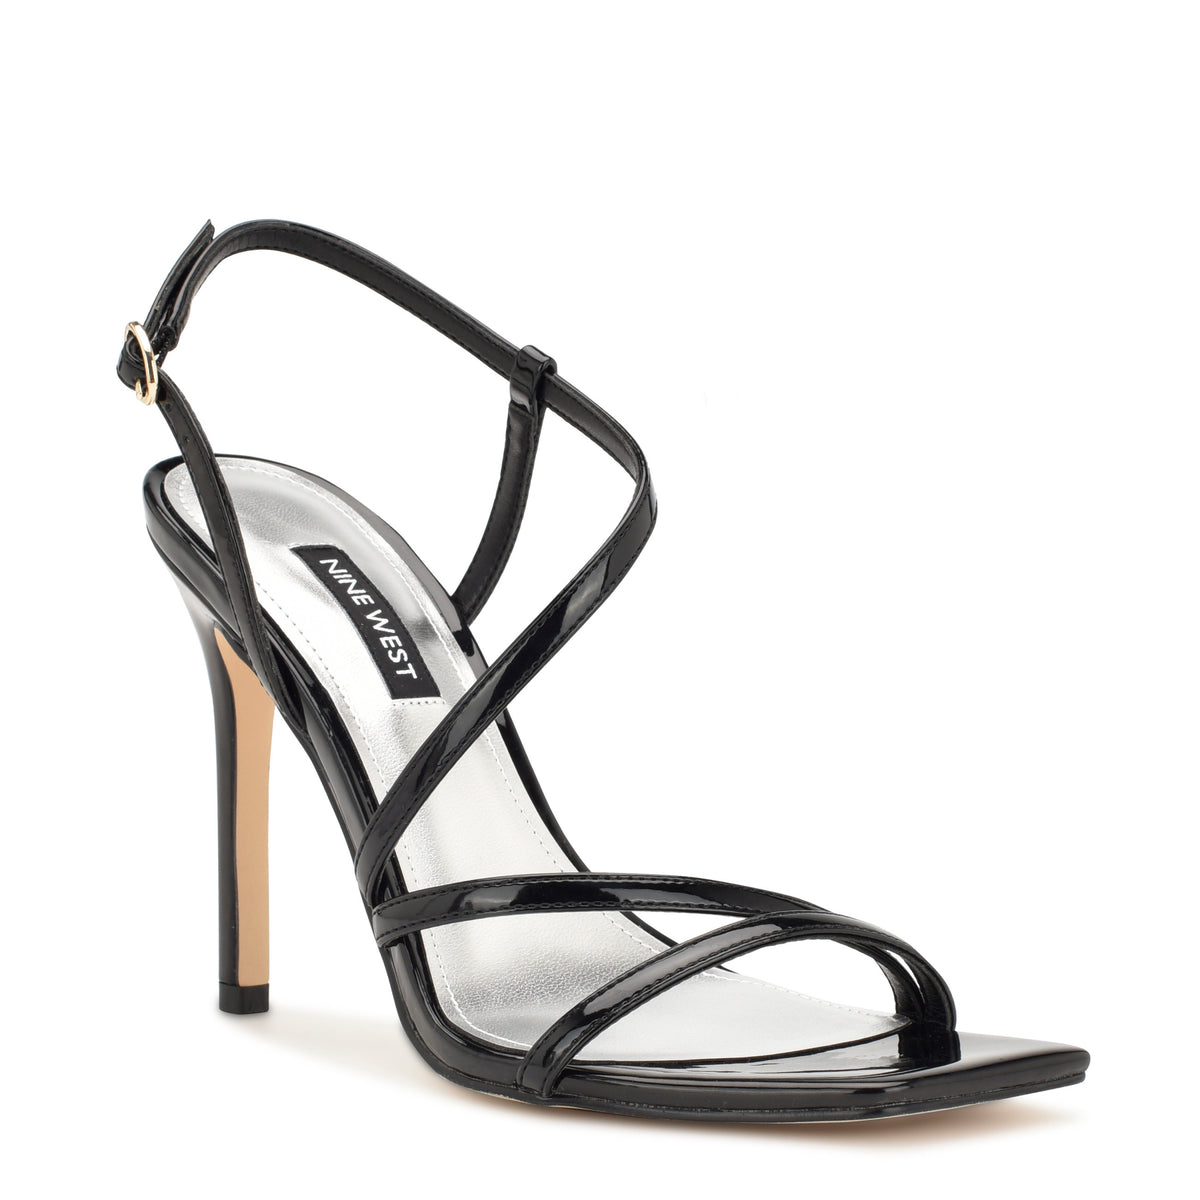 Trulee Strappy Heeled Sandals